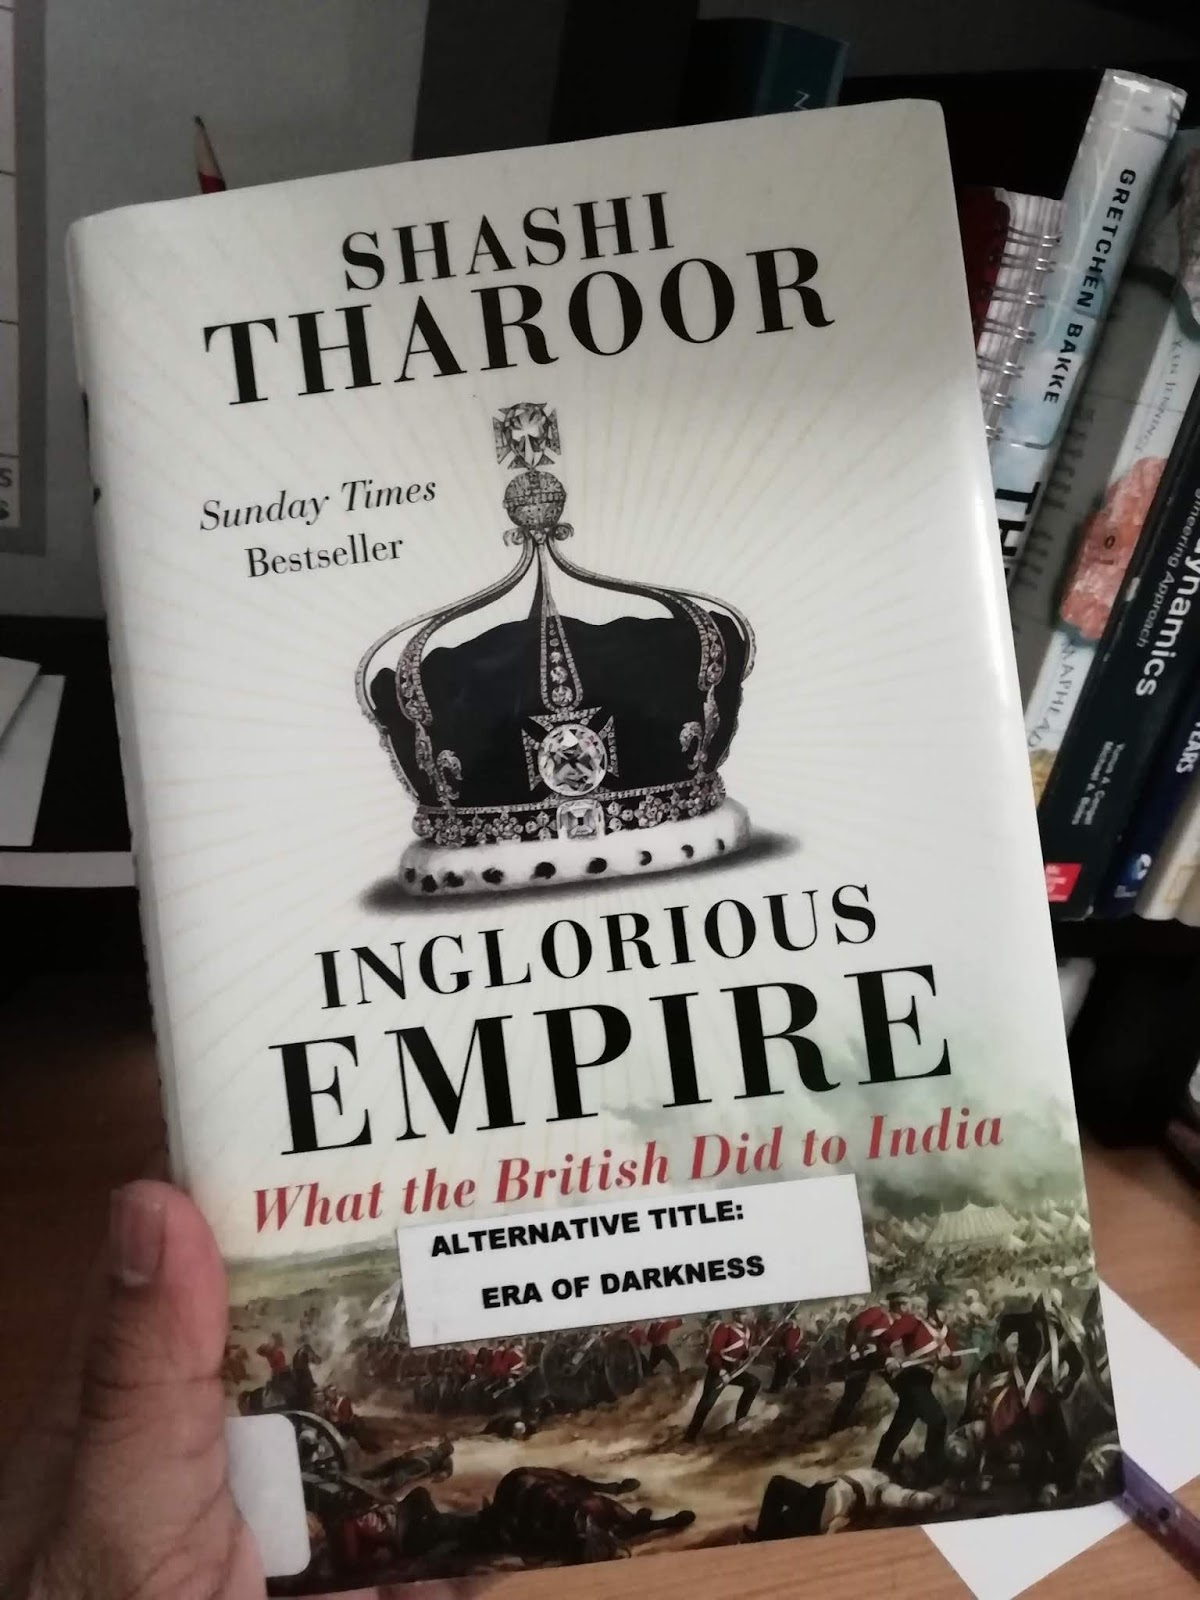 Book Post 9: ”Inglorious Empire” by Shashi Tharoor